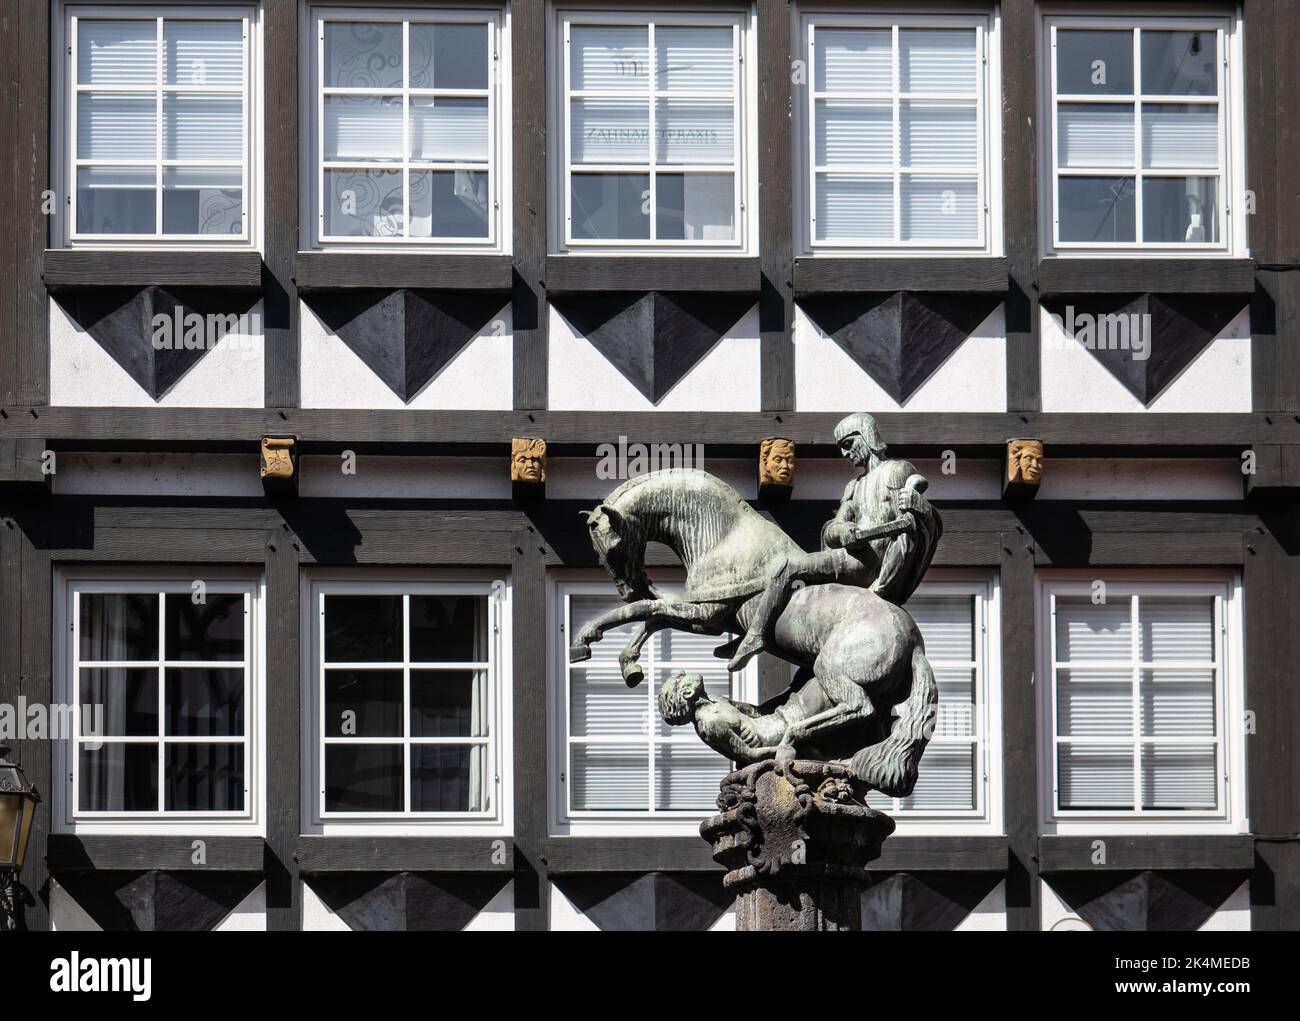 Statue in marketplace, Cochem, half-timbered building behind Stock Photo